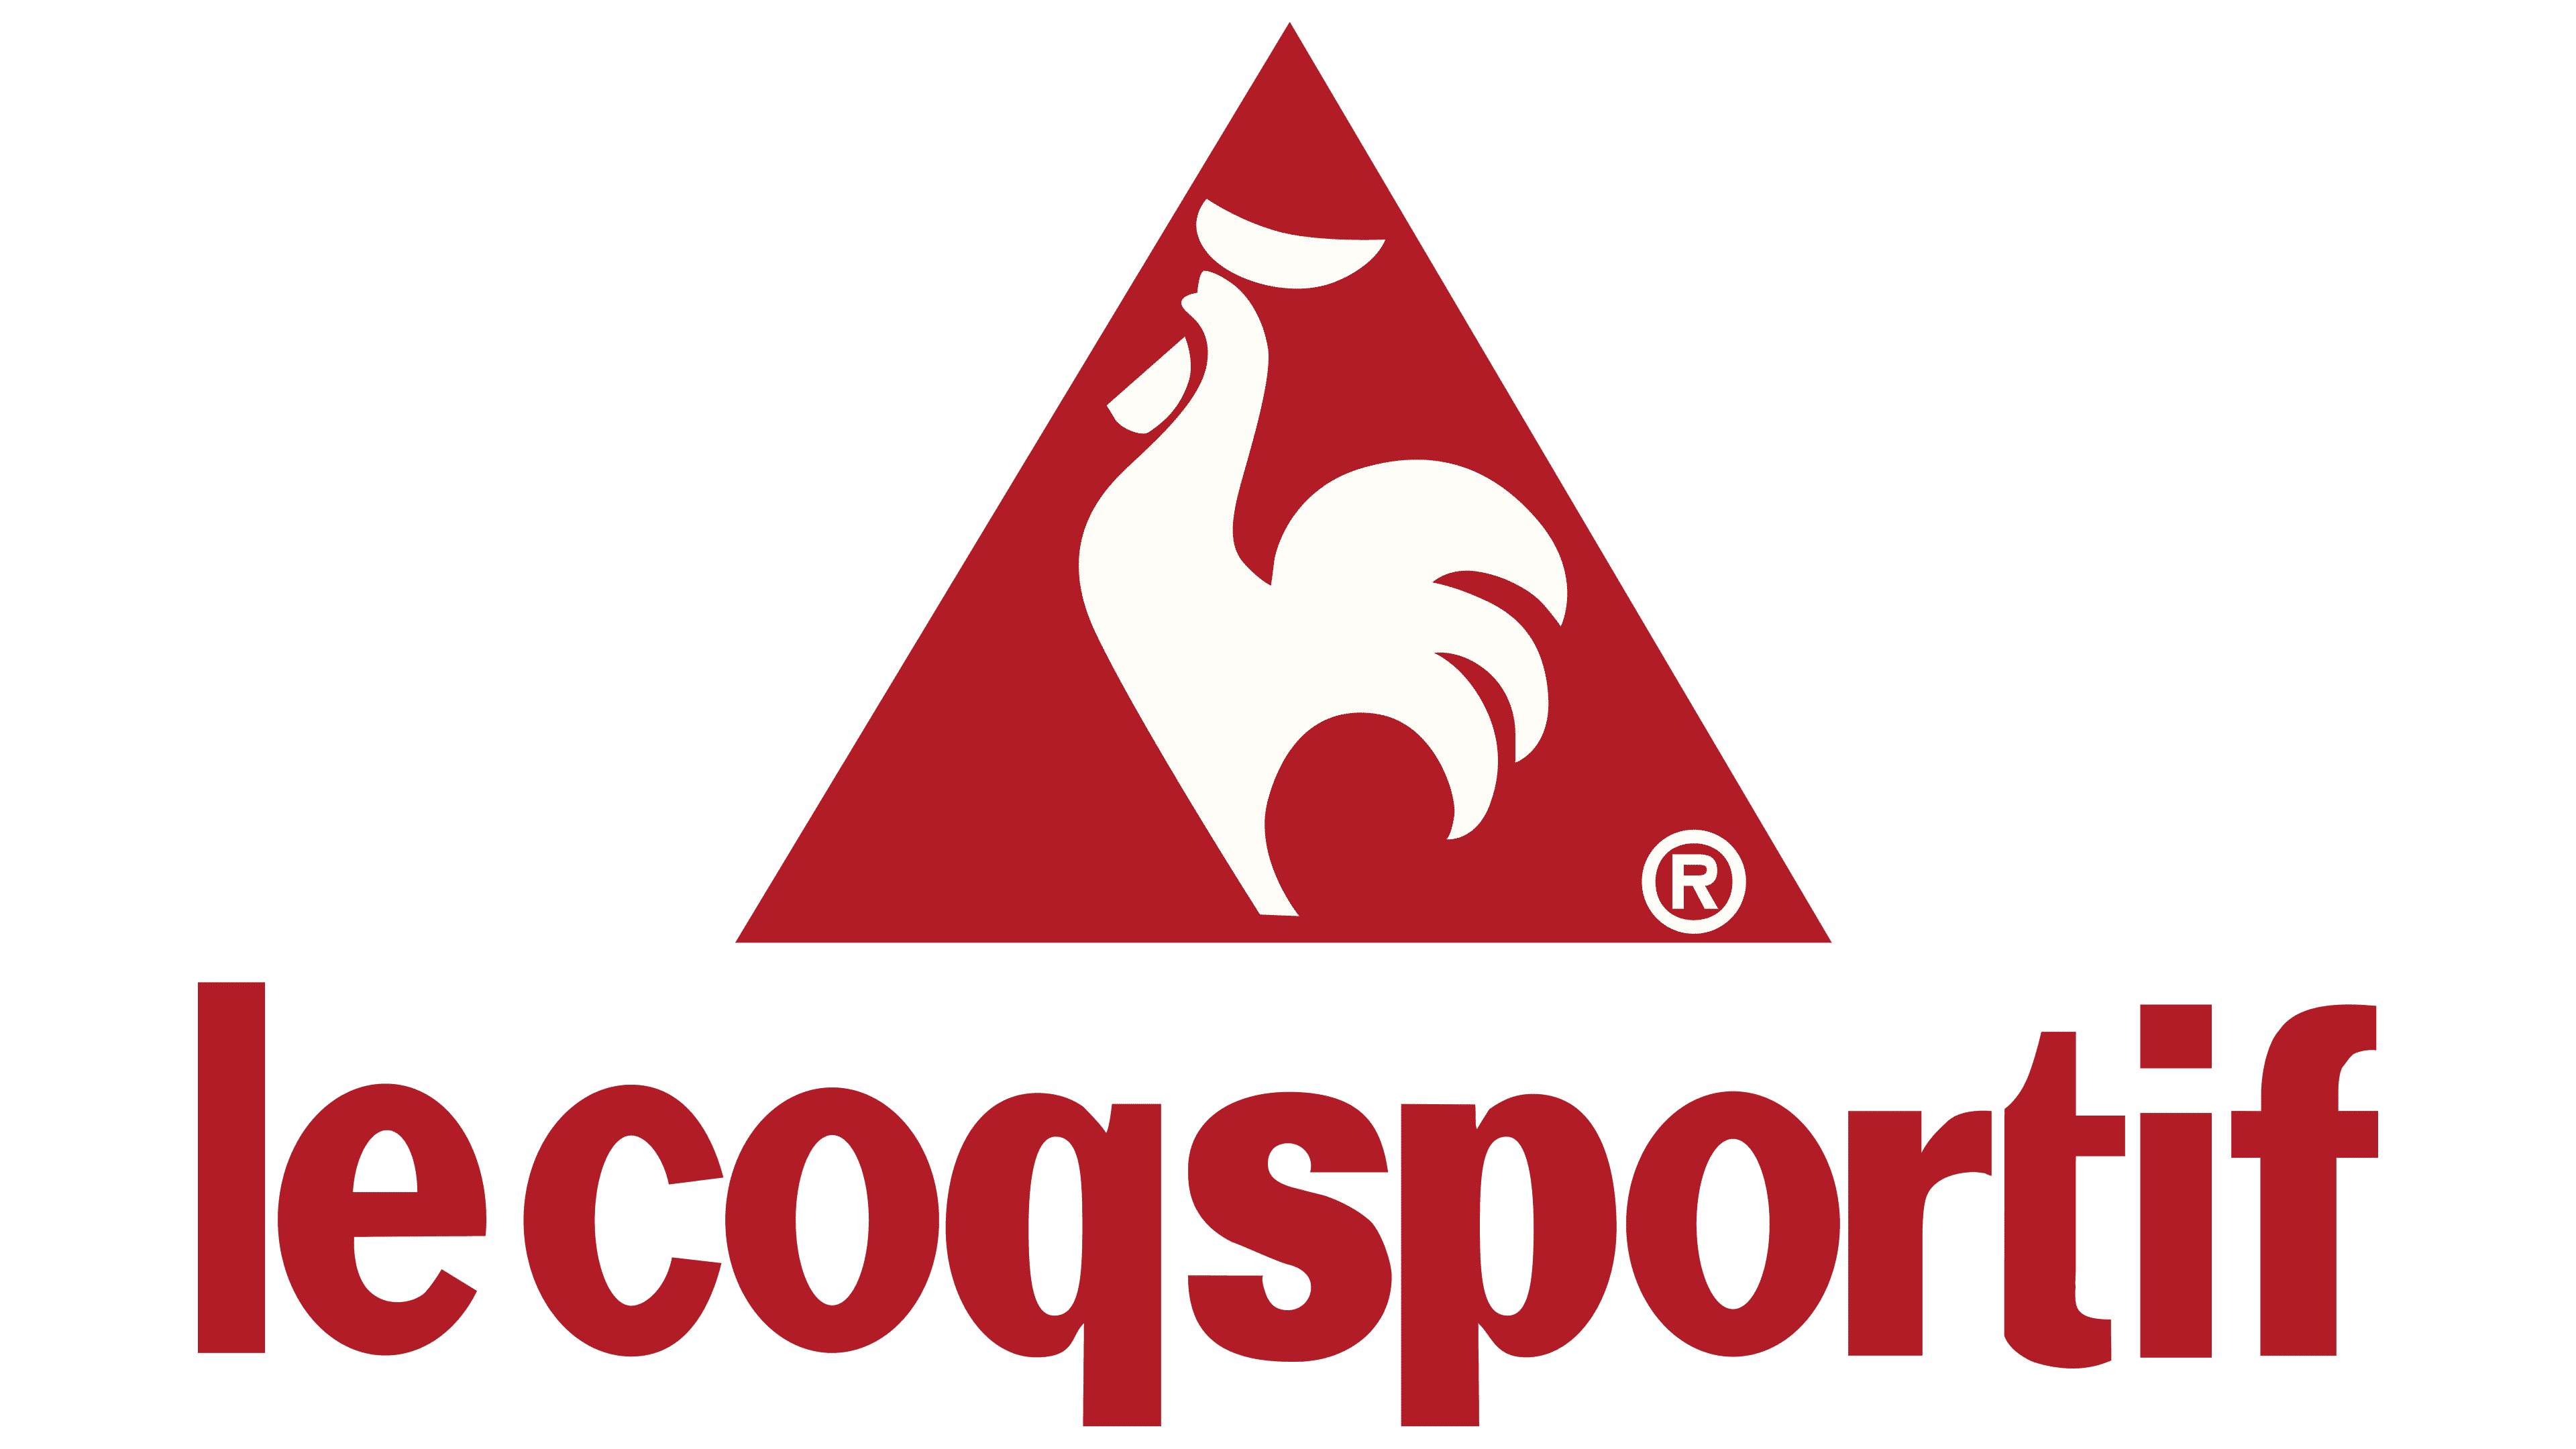 Le Coq Sportif Logo And Symbol, Meaning, History, PNG, Brand | vlr.eng.br